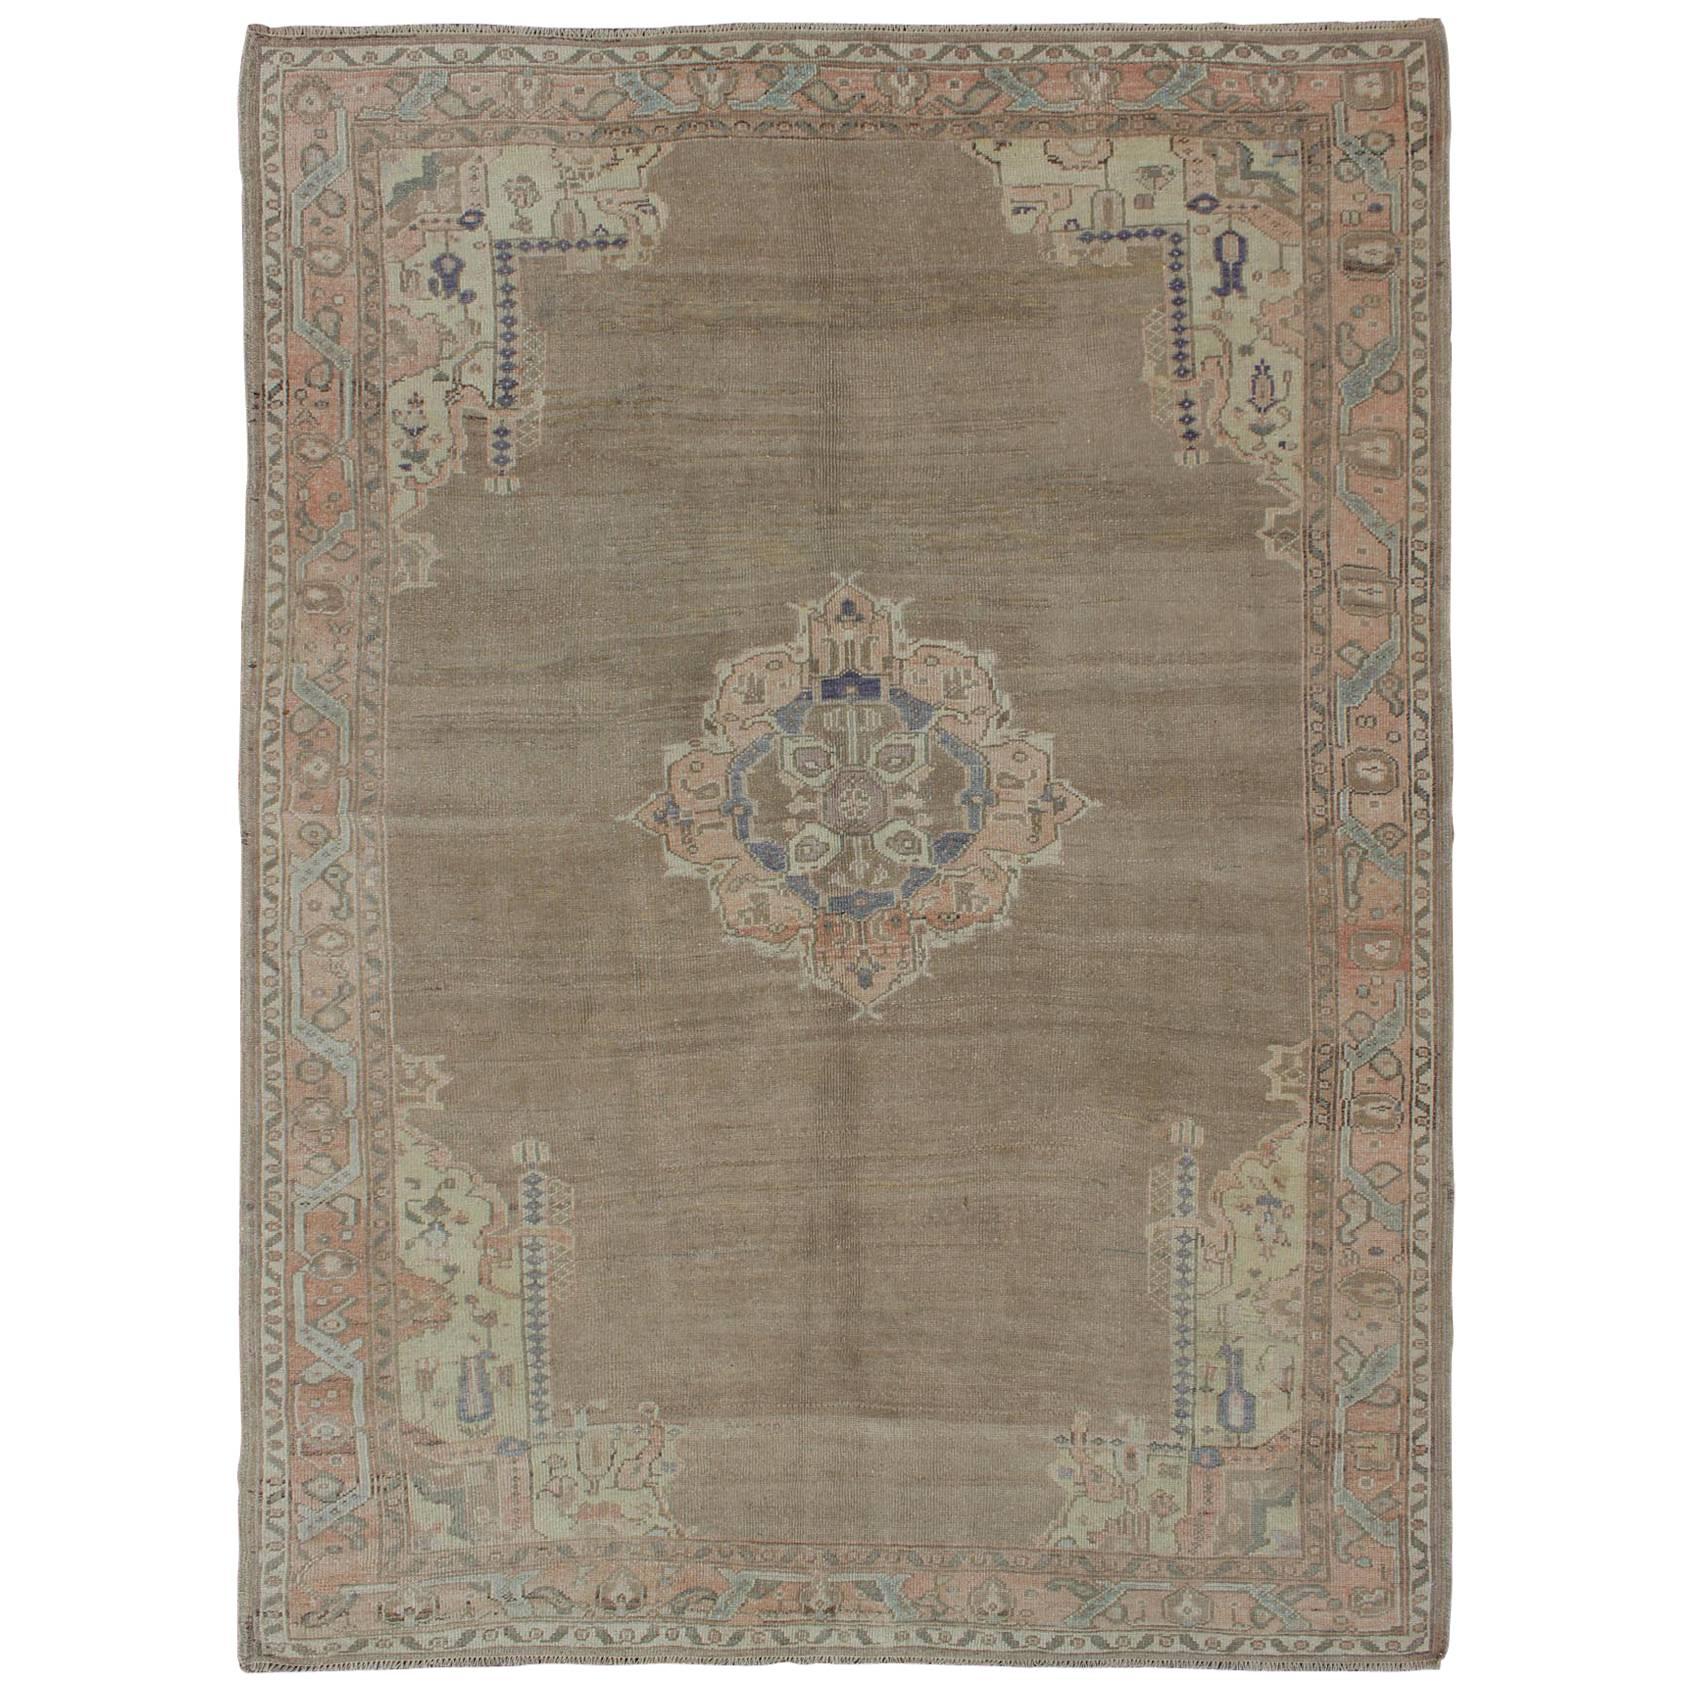 Vintage Turkish Oushak Rug with Medallion and Flowers in Taupe, Ivory, Gray